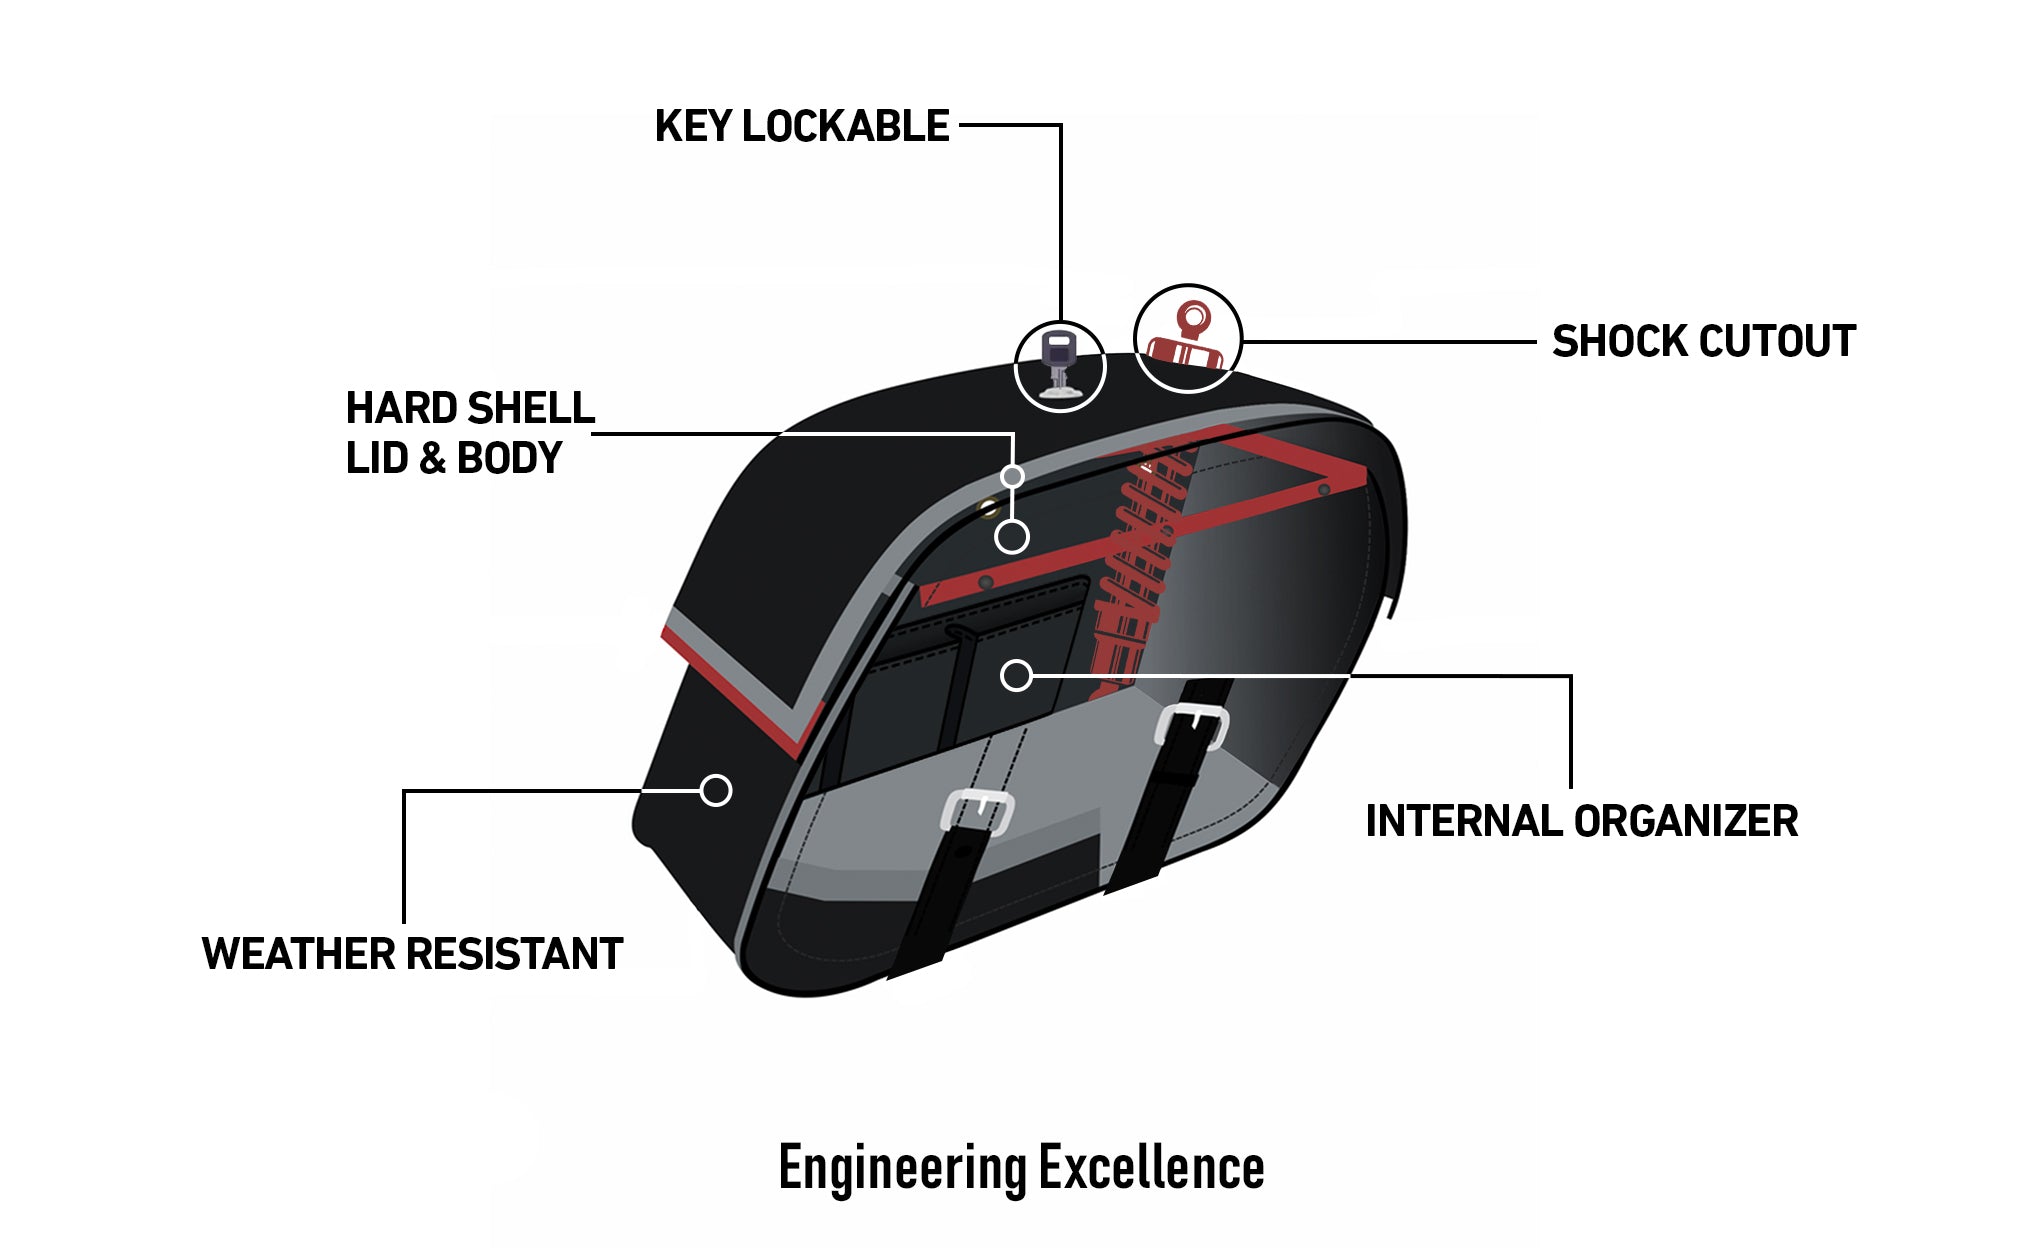 Viking Raven Extra Large Honda Vtx 1800 F Shock Cut Out Leather Motorcycle Saddlebags Engineering Excellence with Bag on Bike @expand